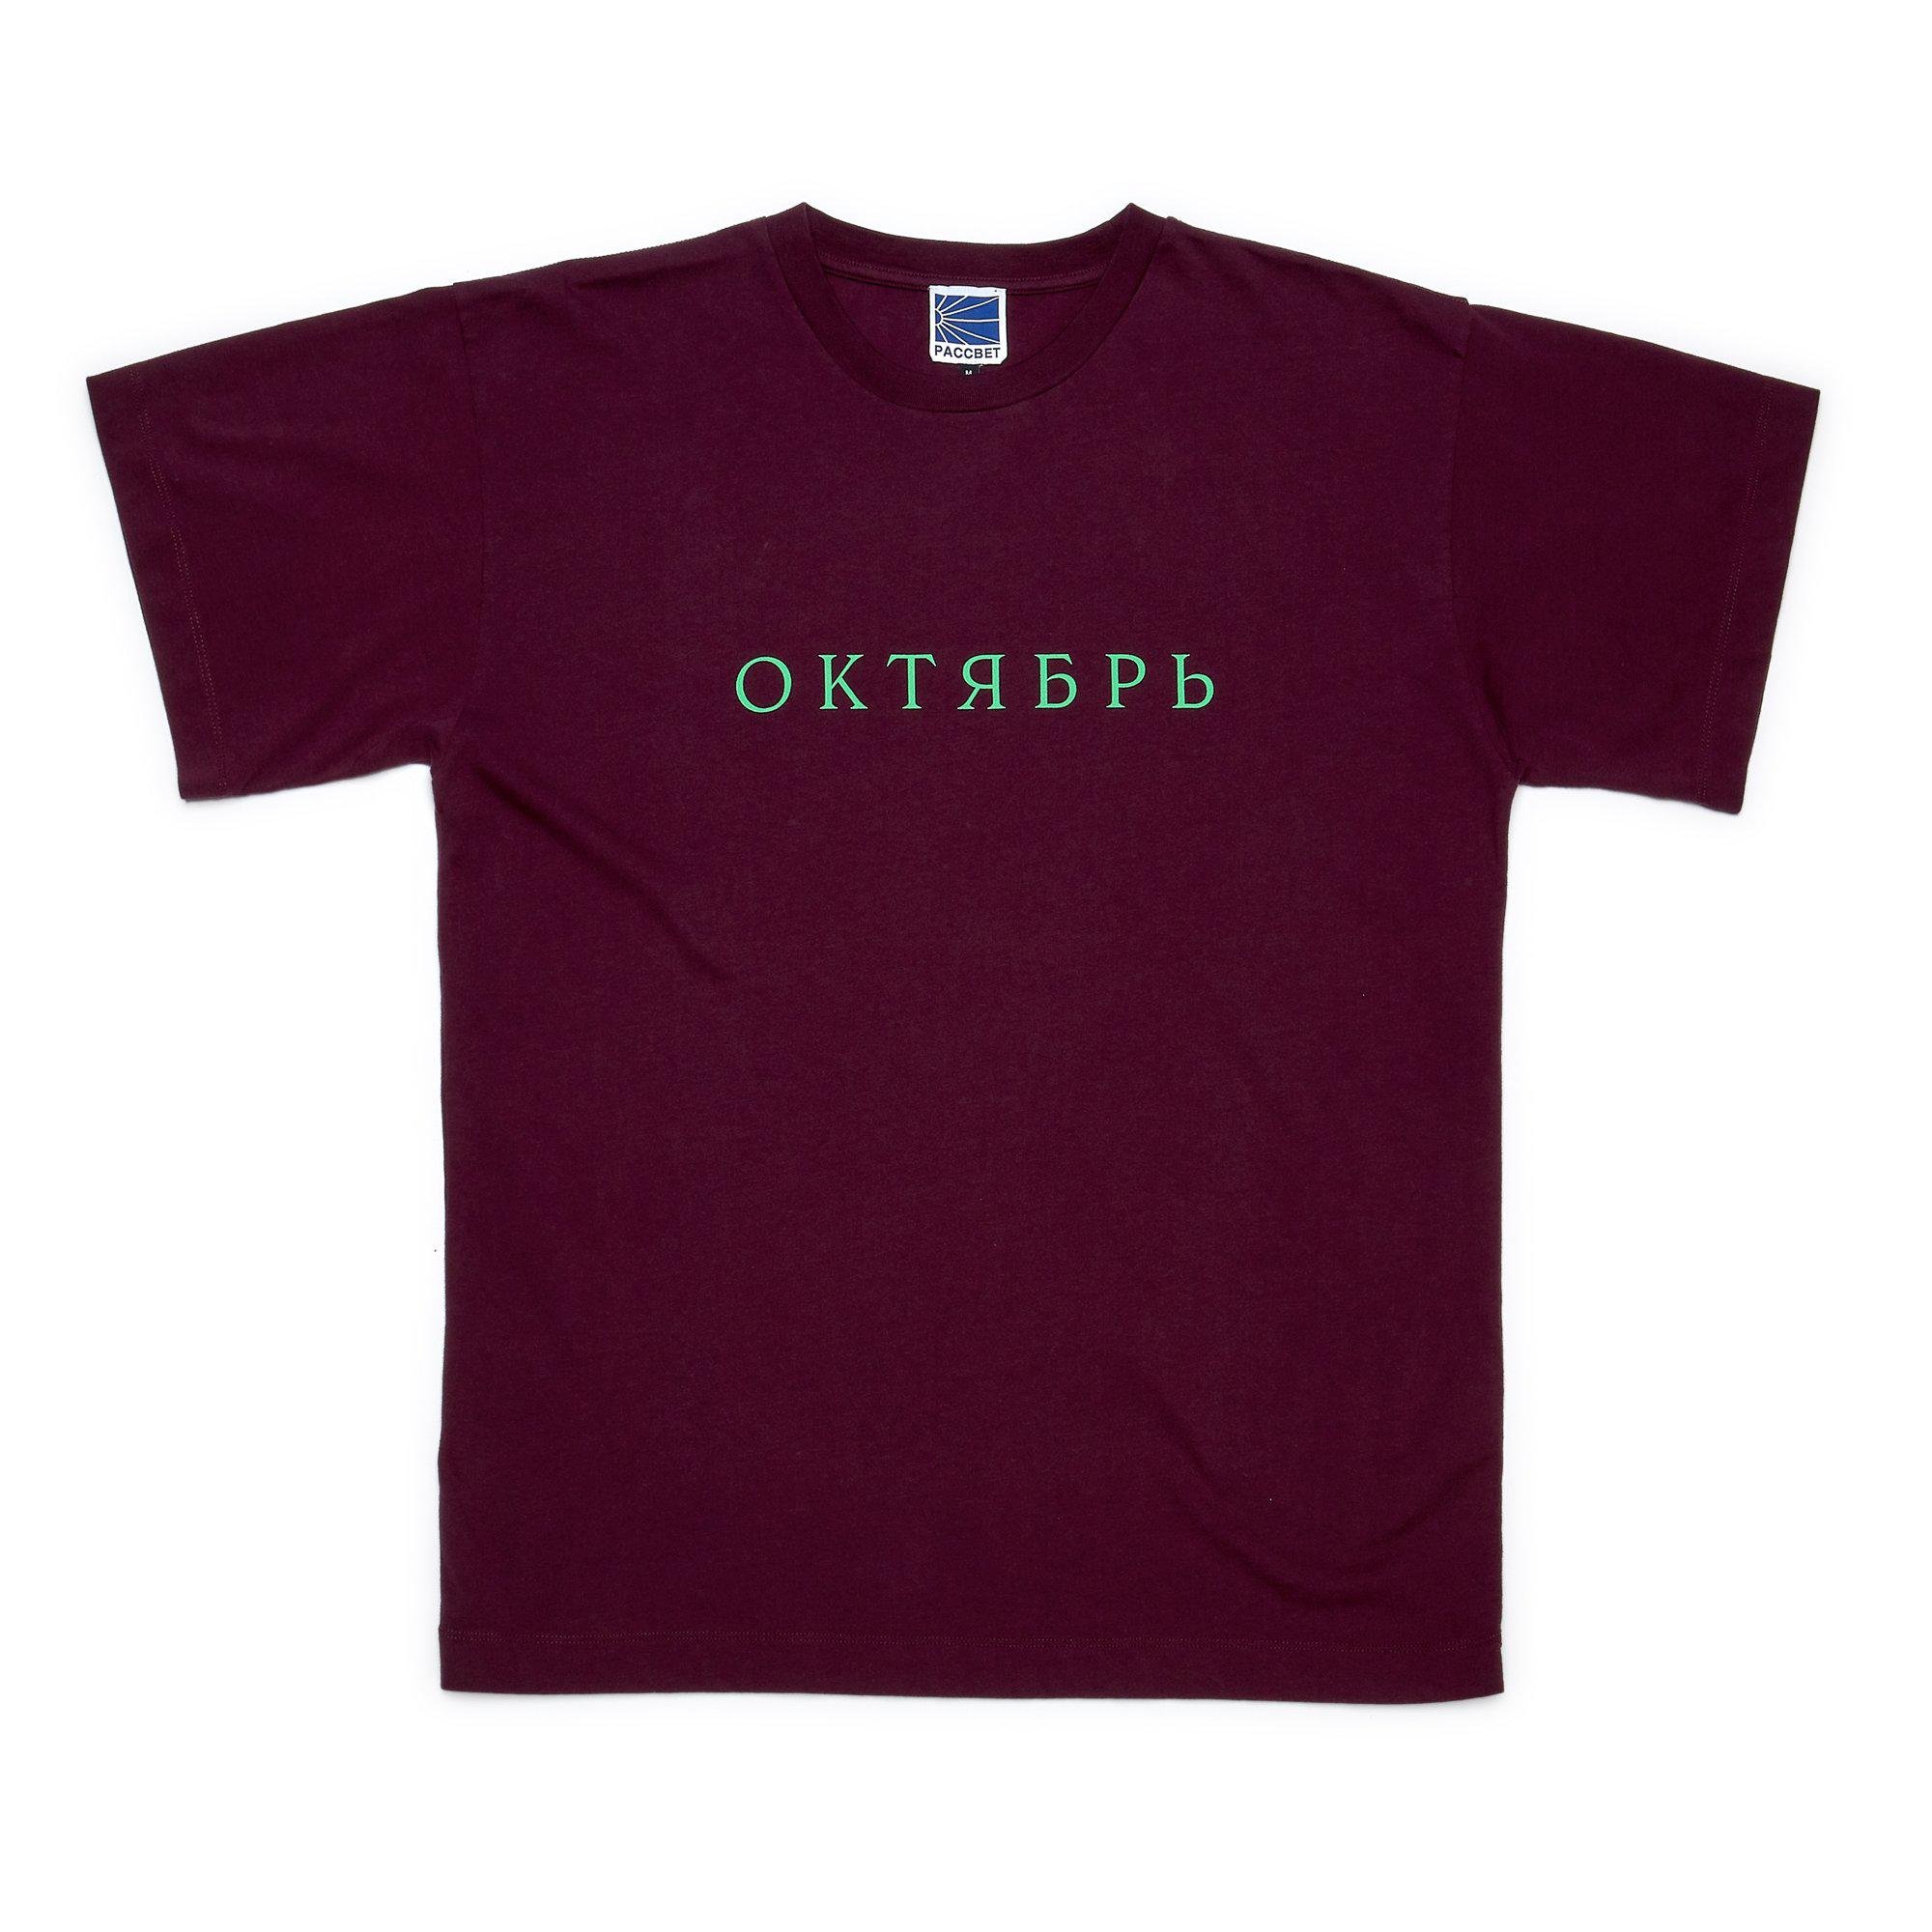 PACCBET 4 October Classic Printed T-Shirt (Burgundy) by UNIFORMA